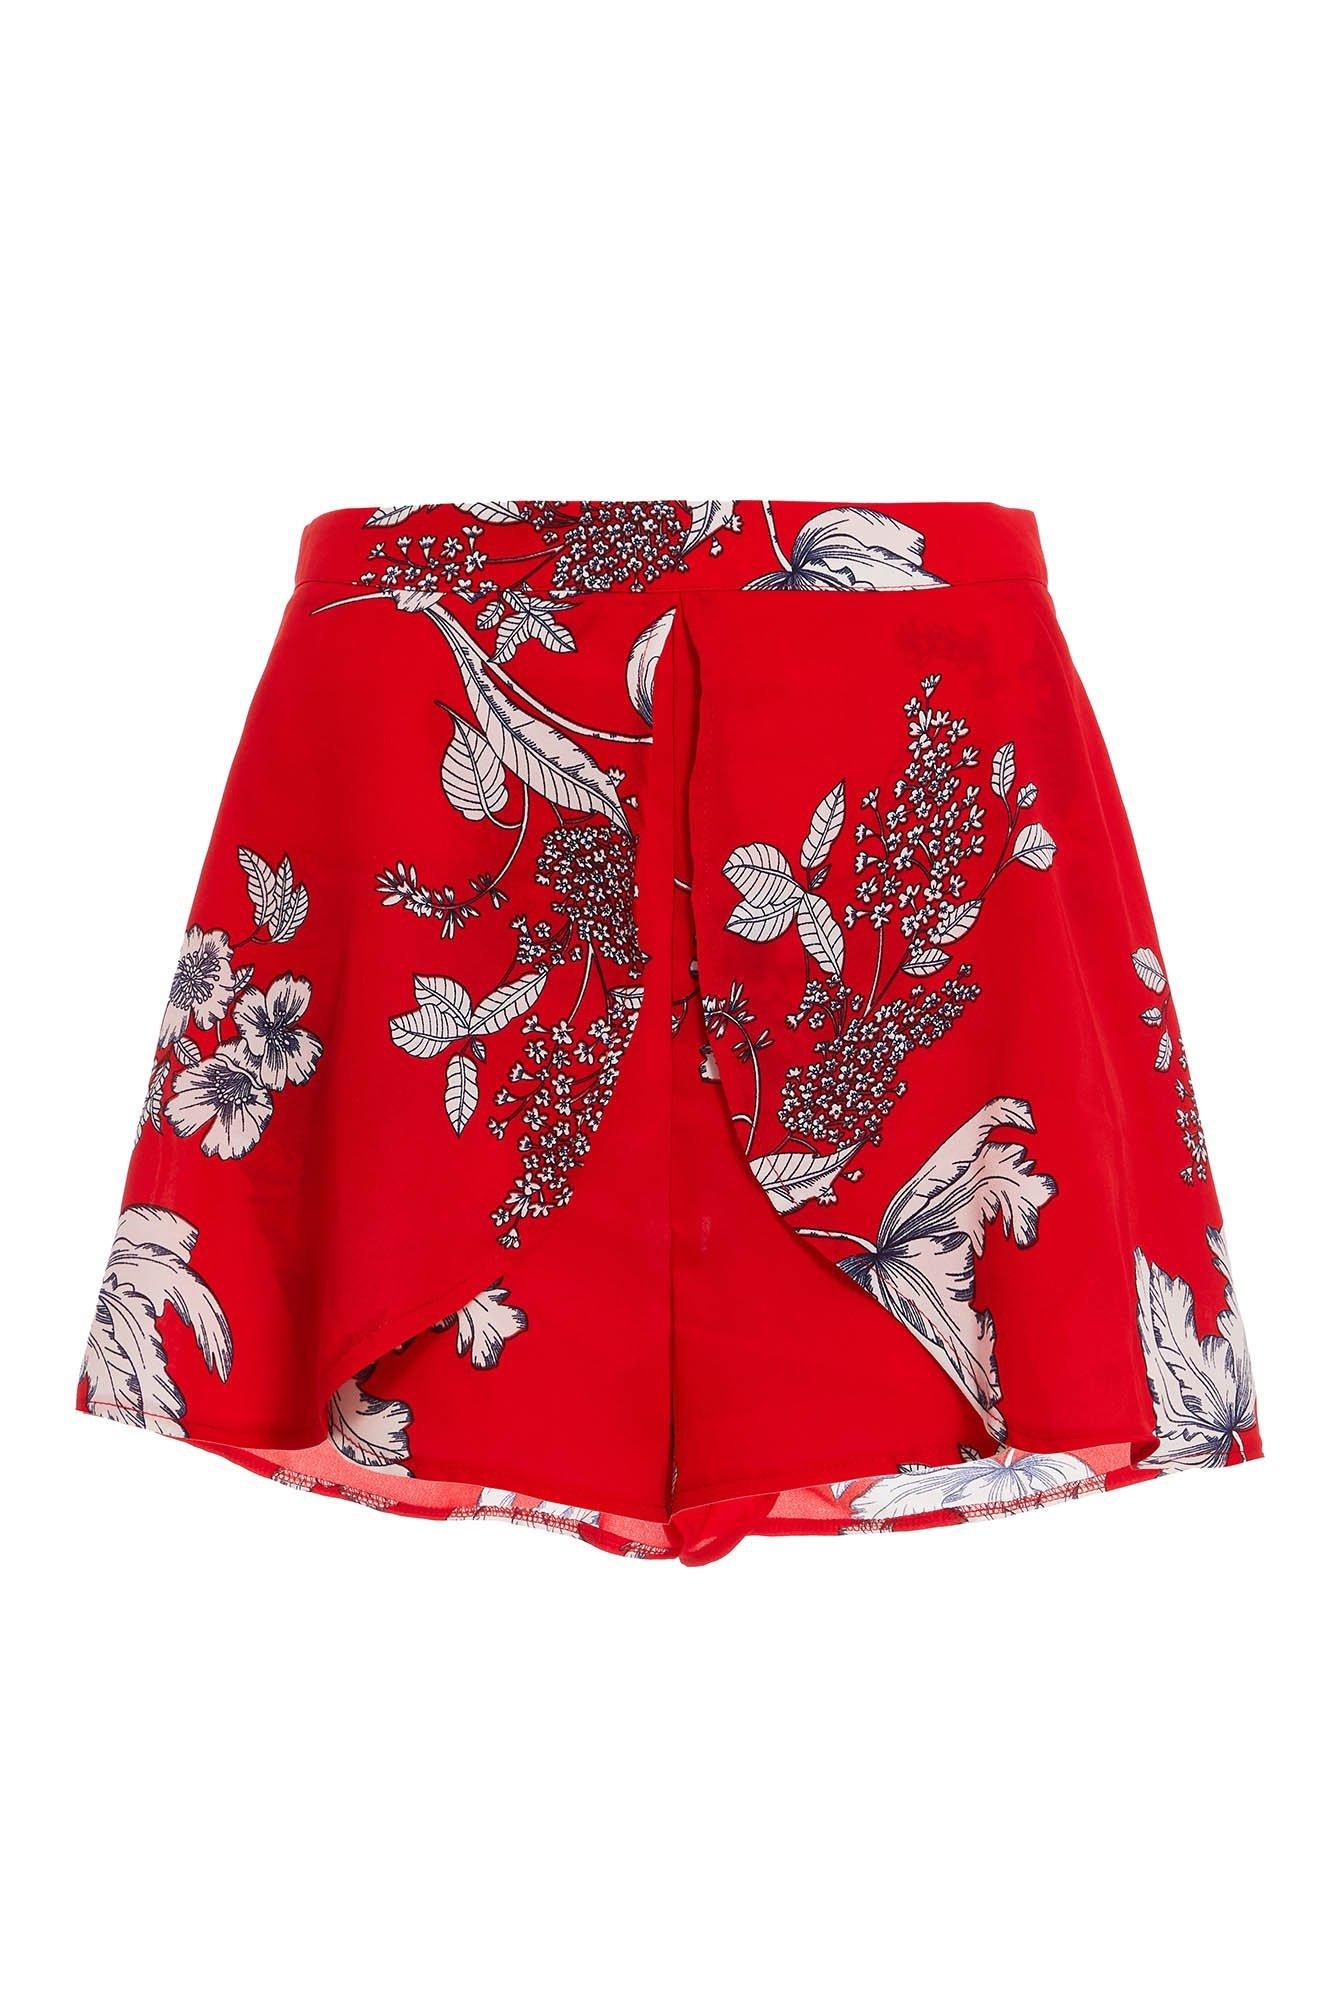 Red and White Floral Shorts - Quiz Clothing